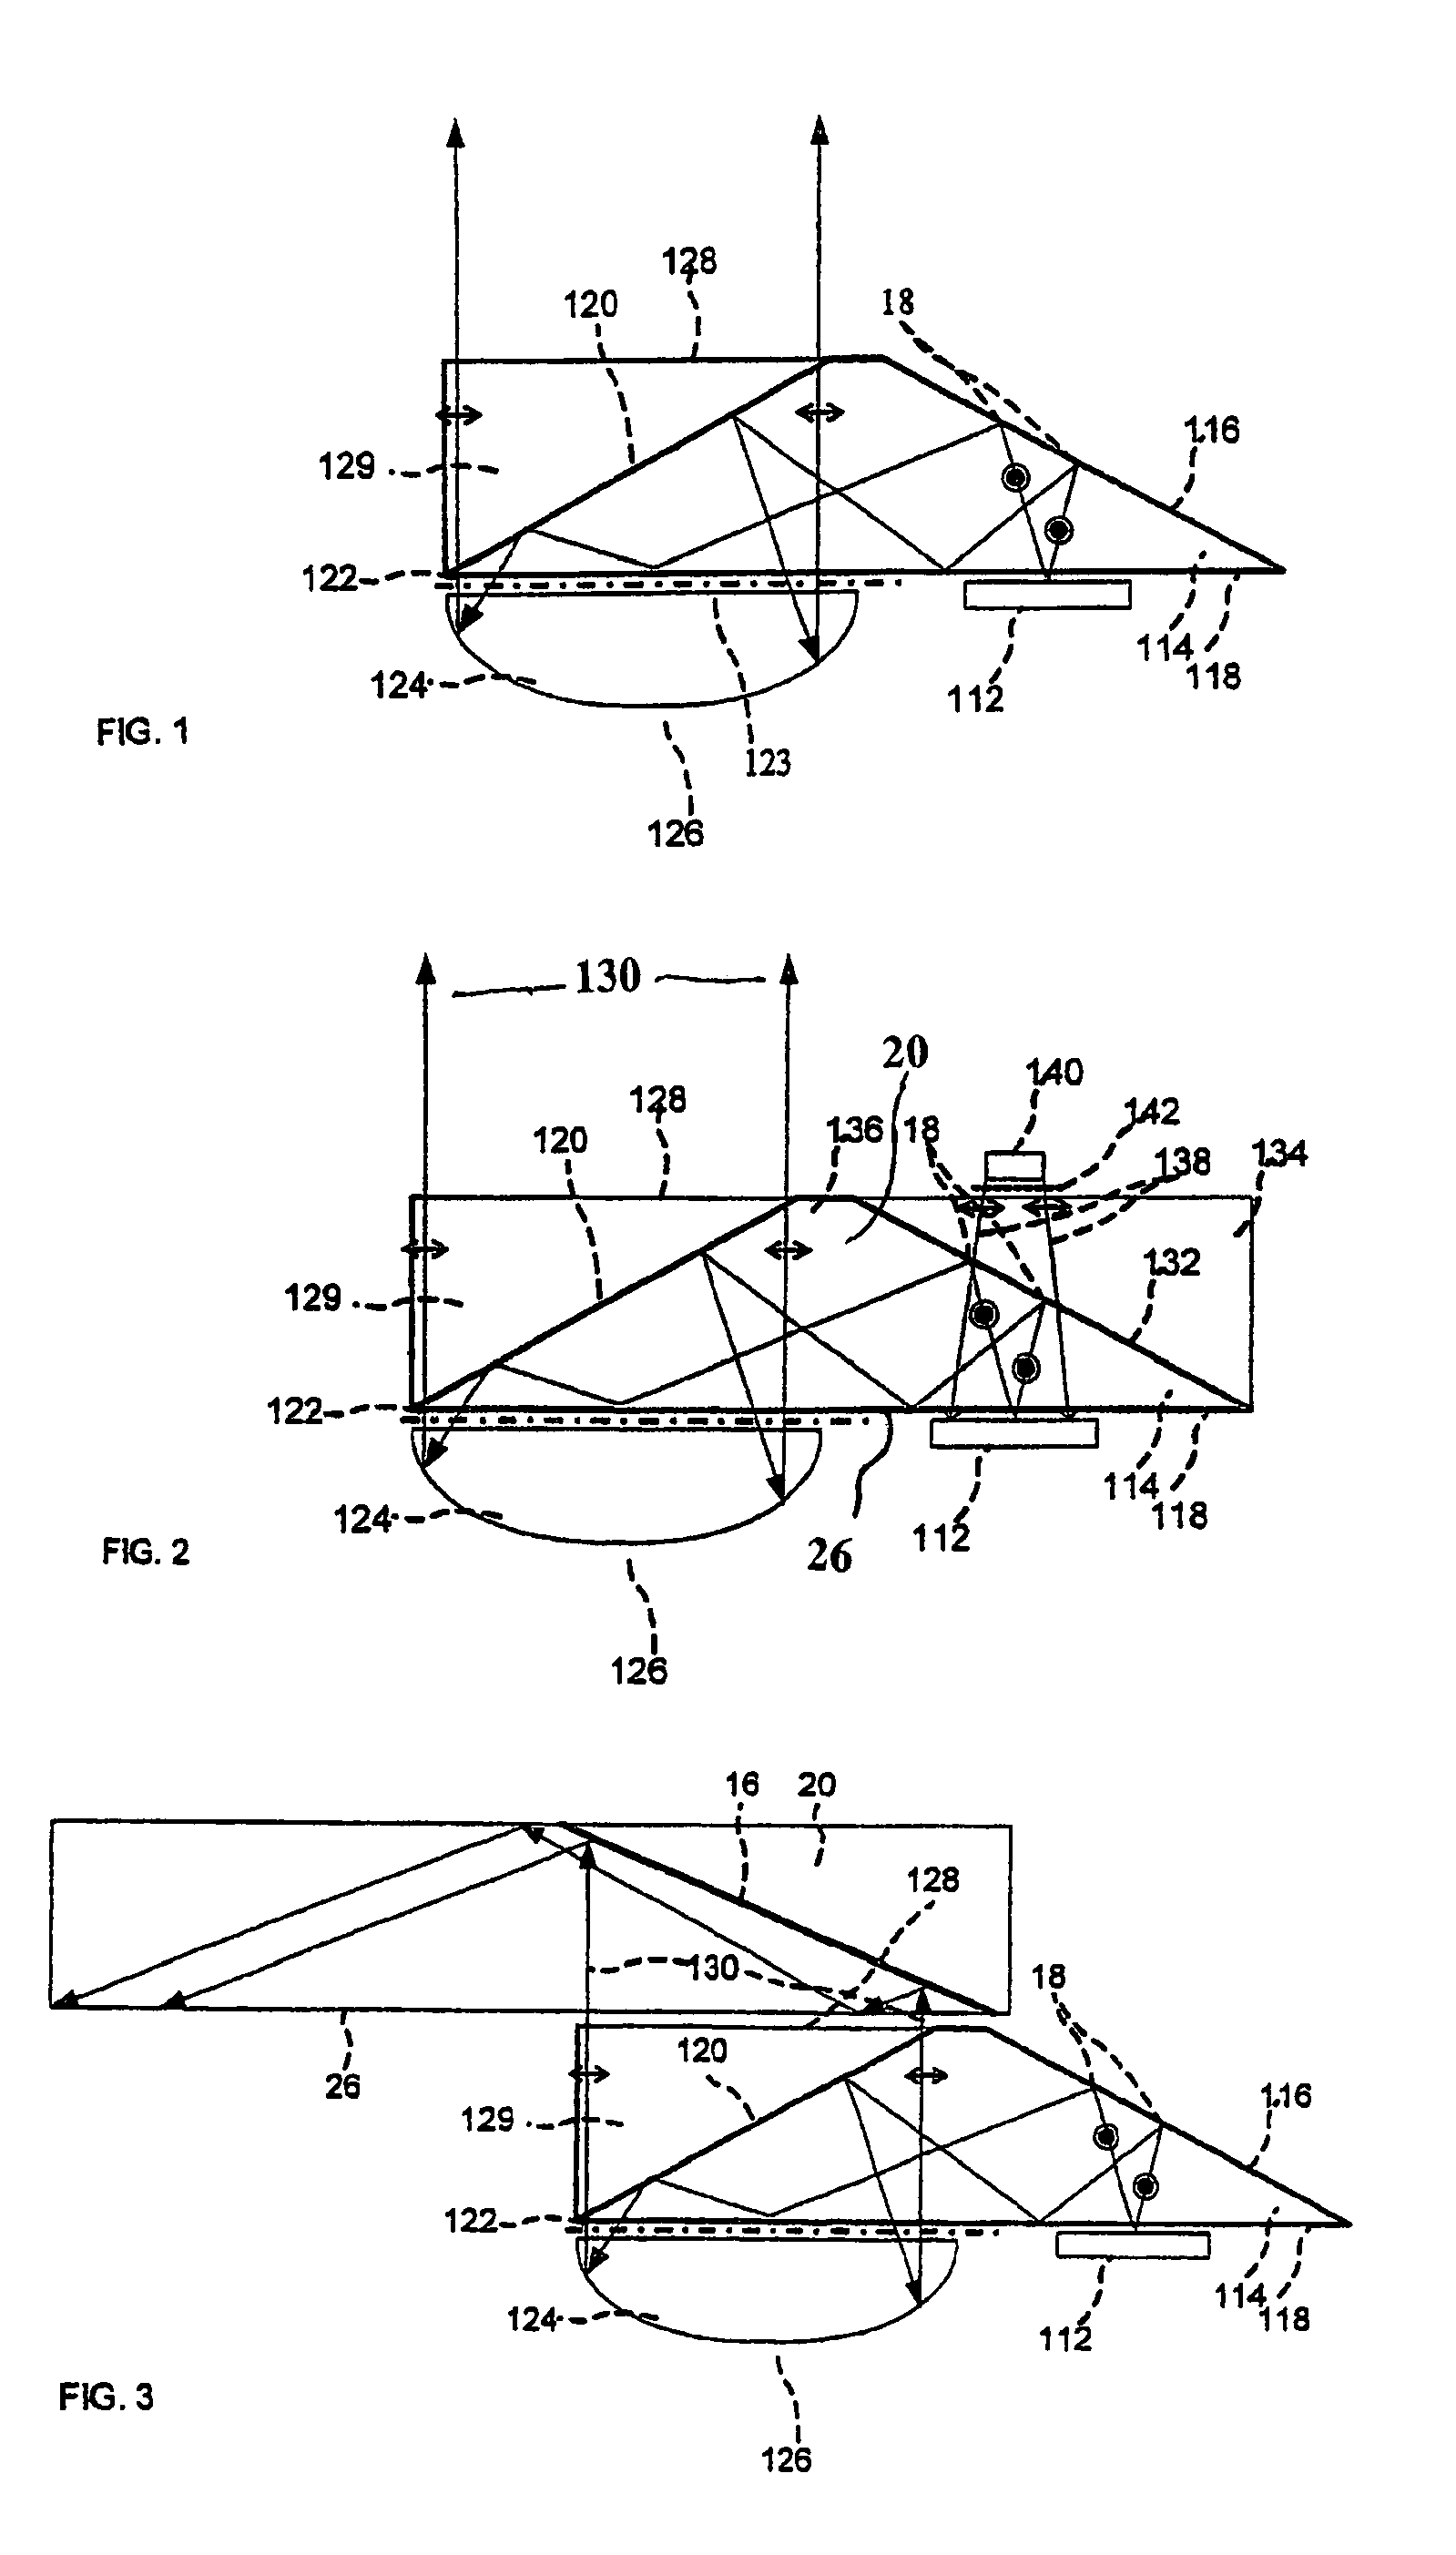 Substrate-guided imaging lens